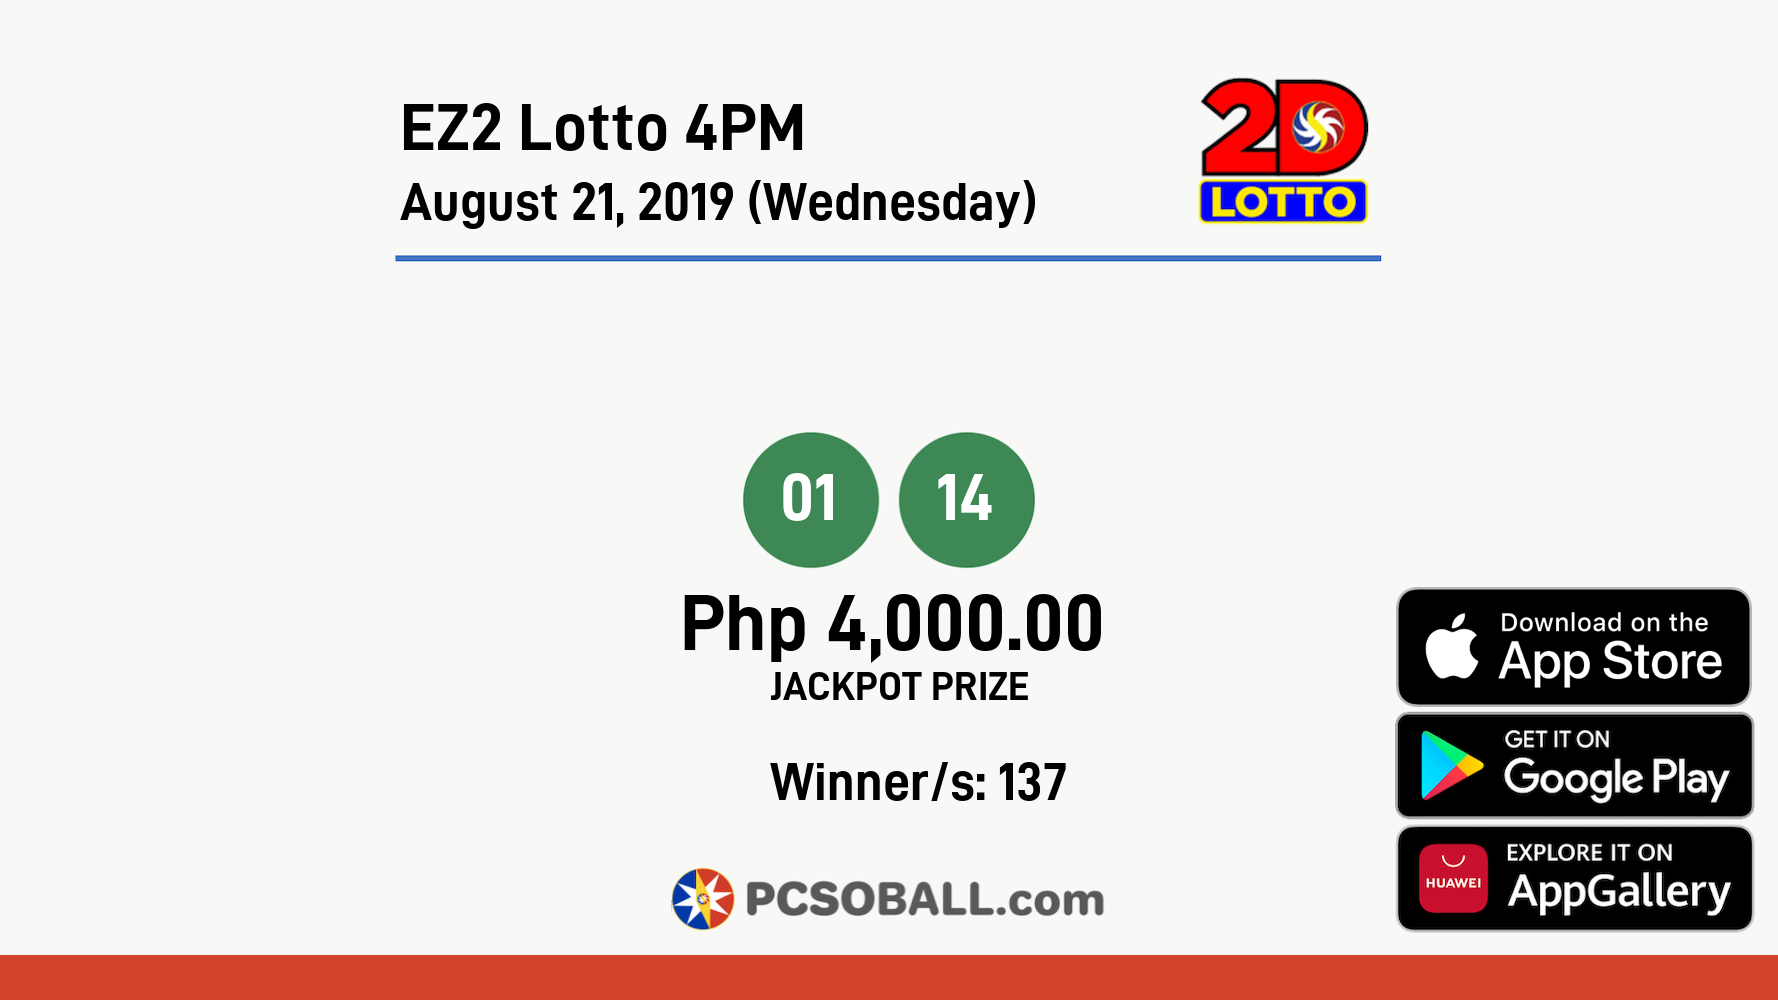 EZ2 Lotto 4PM August 21, 2019 (Wednesday) Result